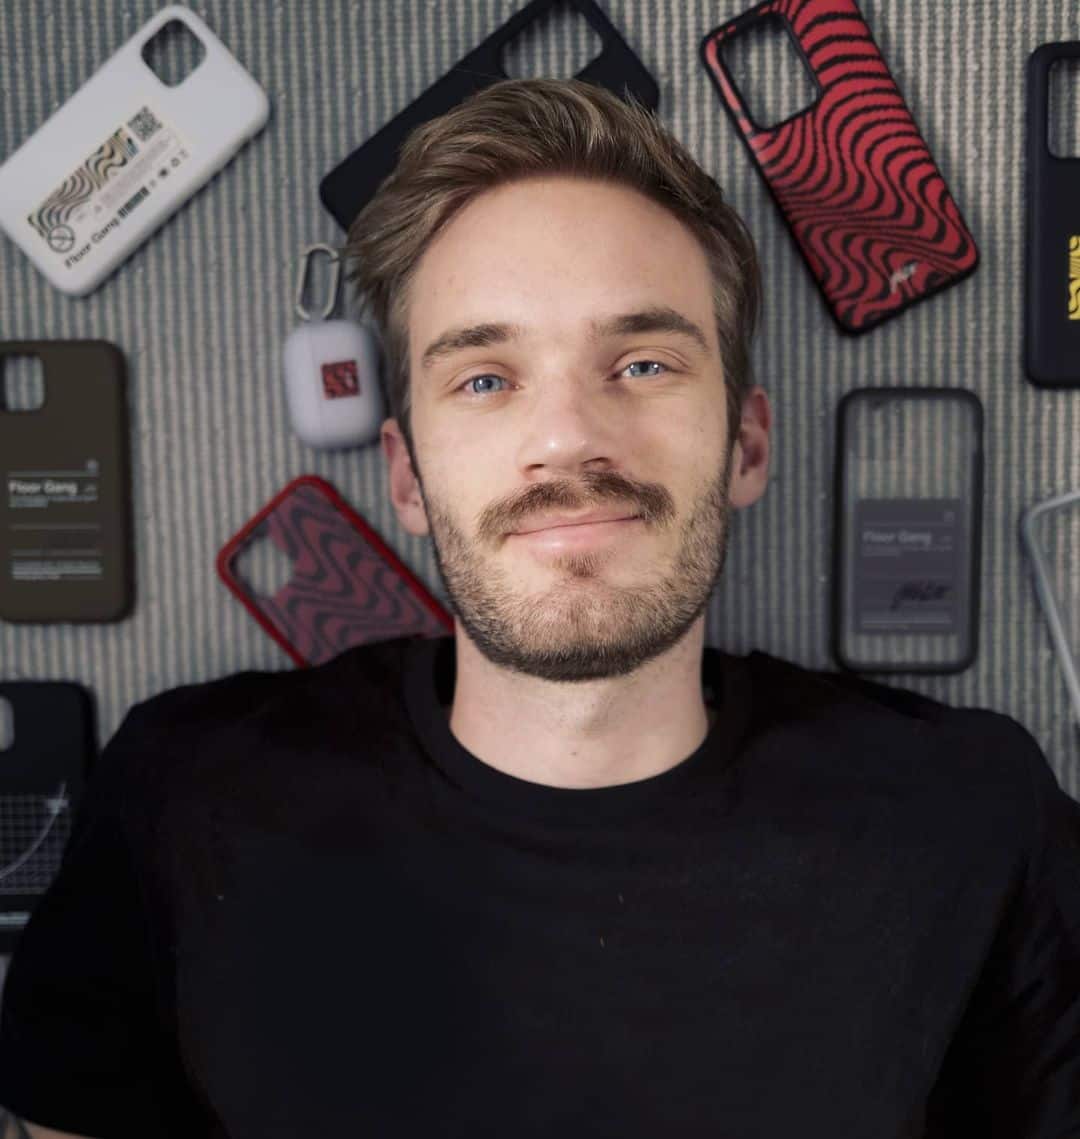 PewDiePie - Biography, Profile, Facts, and Career